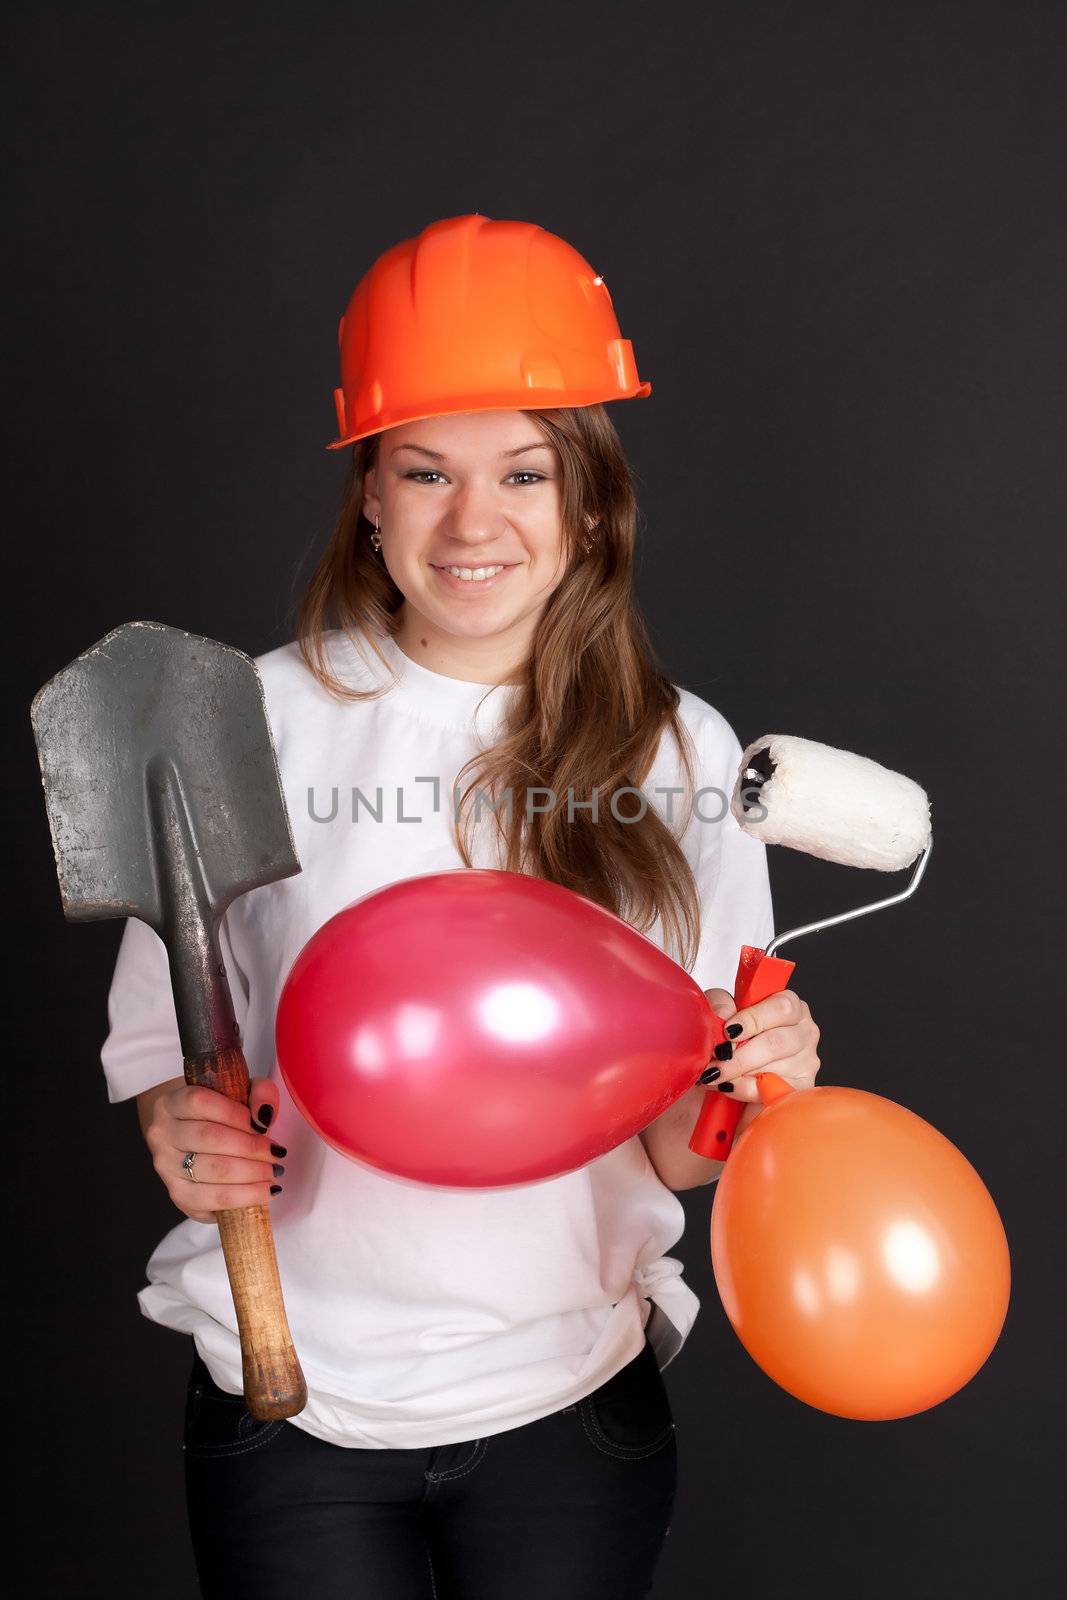 The girl in the orange helmet with balls and a shovel